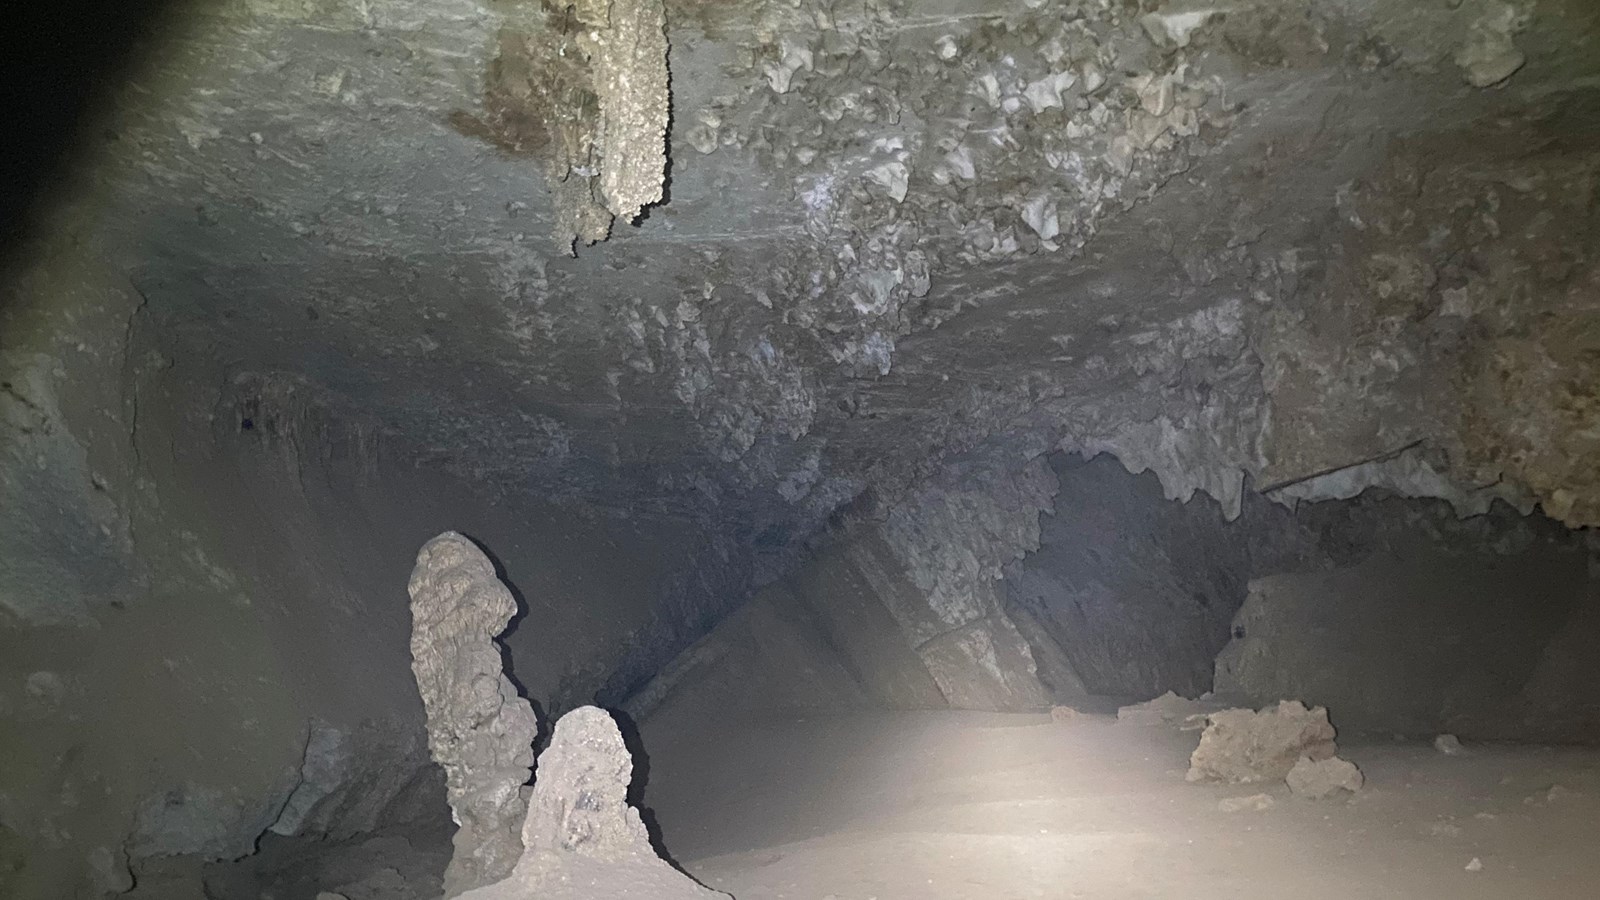 Interior view of cave with stalagmites in the foreground and stalactites hanging from the ceiling.